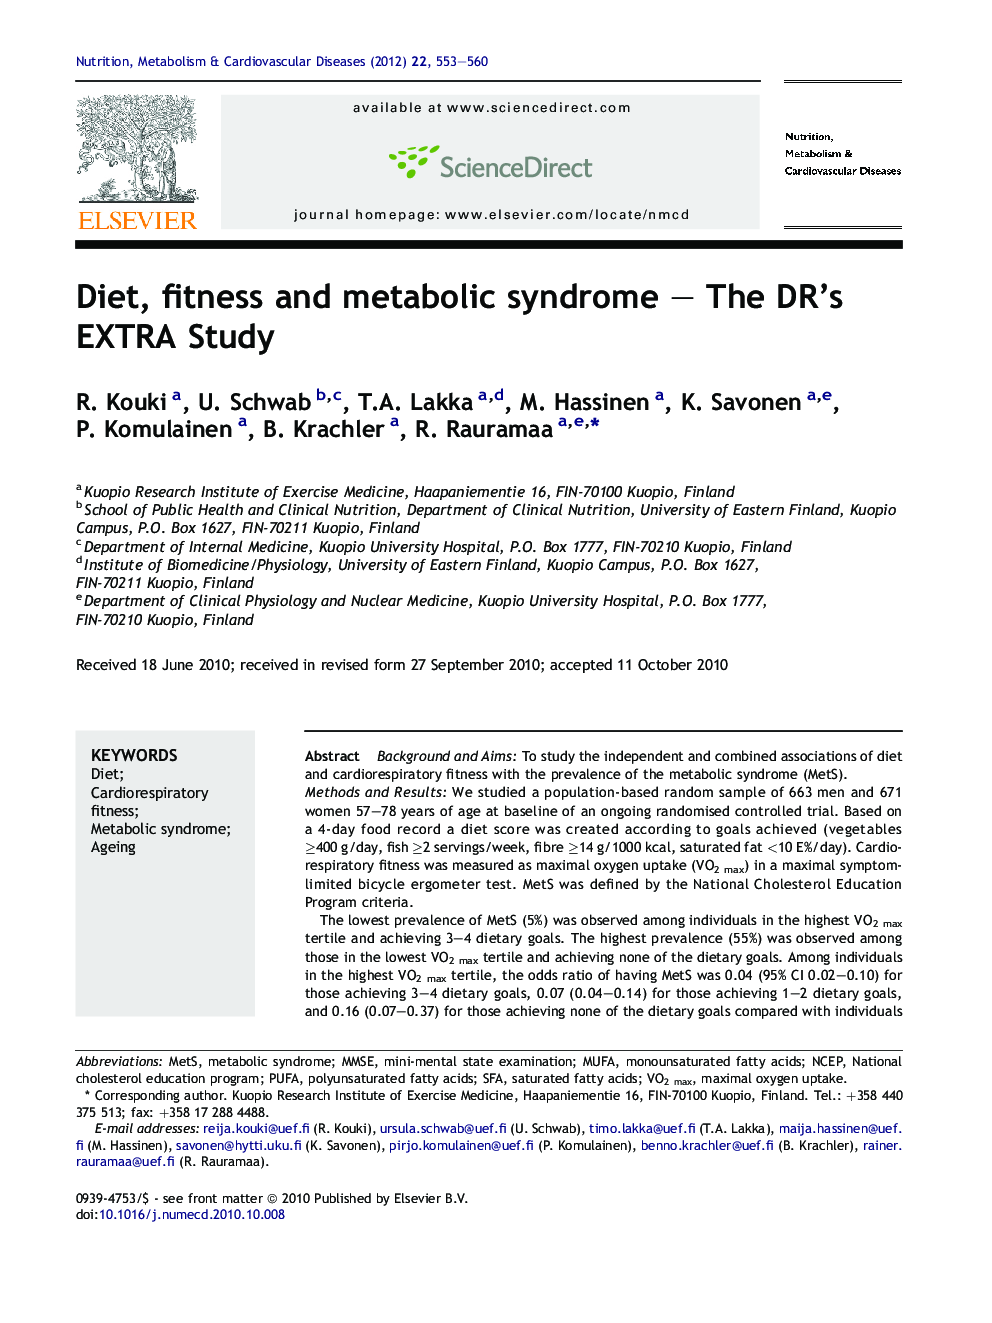 Diet, fitness and metabolic syndrome – The DR’s EXTRA Study